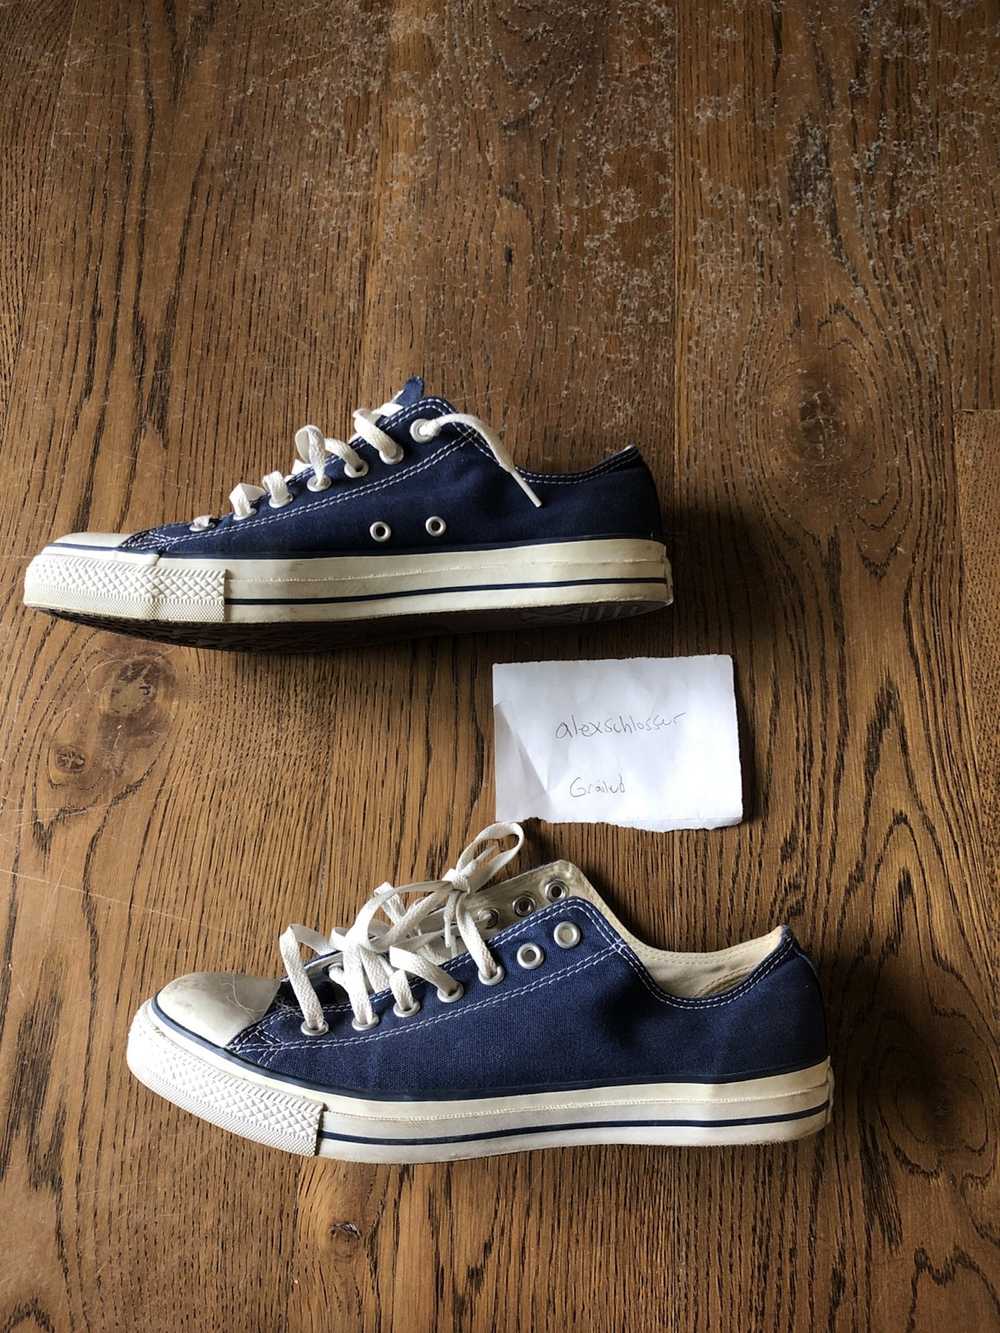 Converse Chuck Taylor All Star Ox Navy - image 2